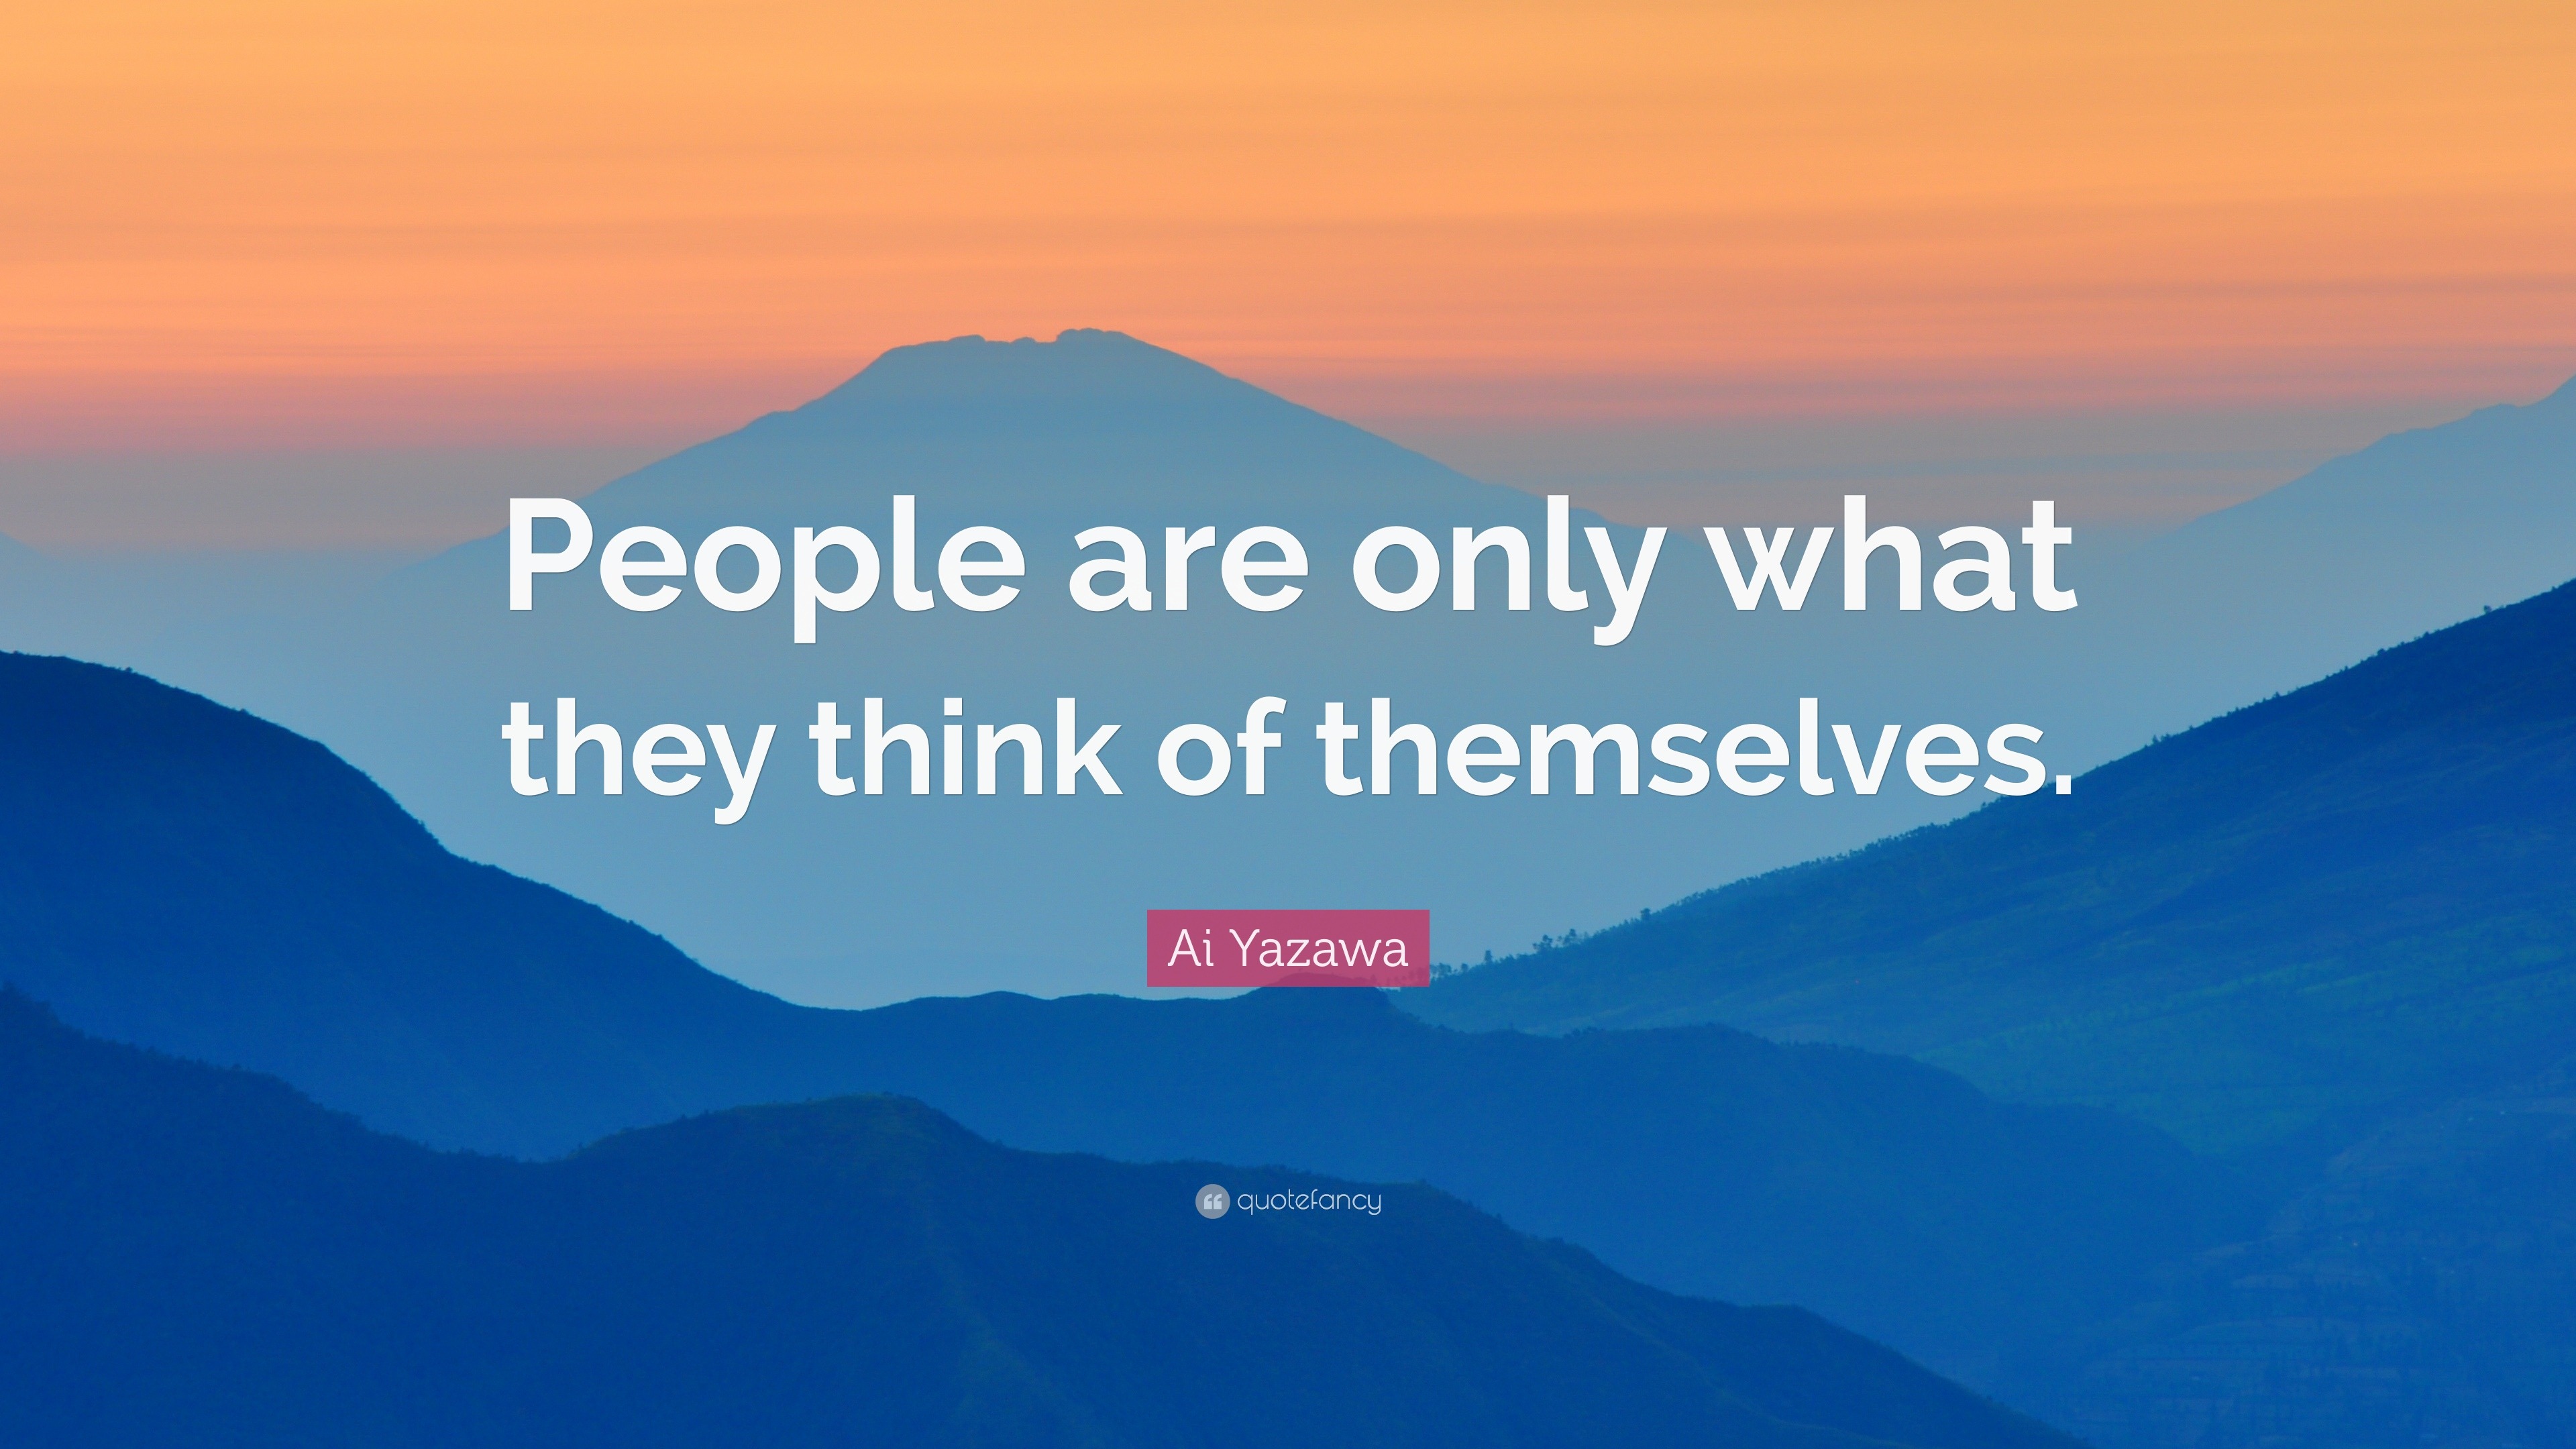 Ai Yazawa Quote: “People are only what they think of themselves.”